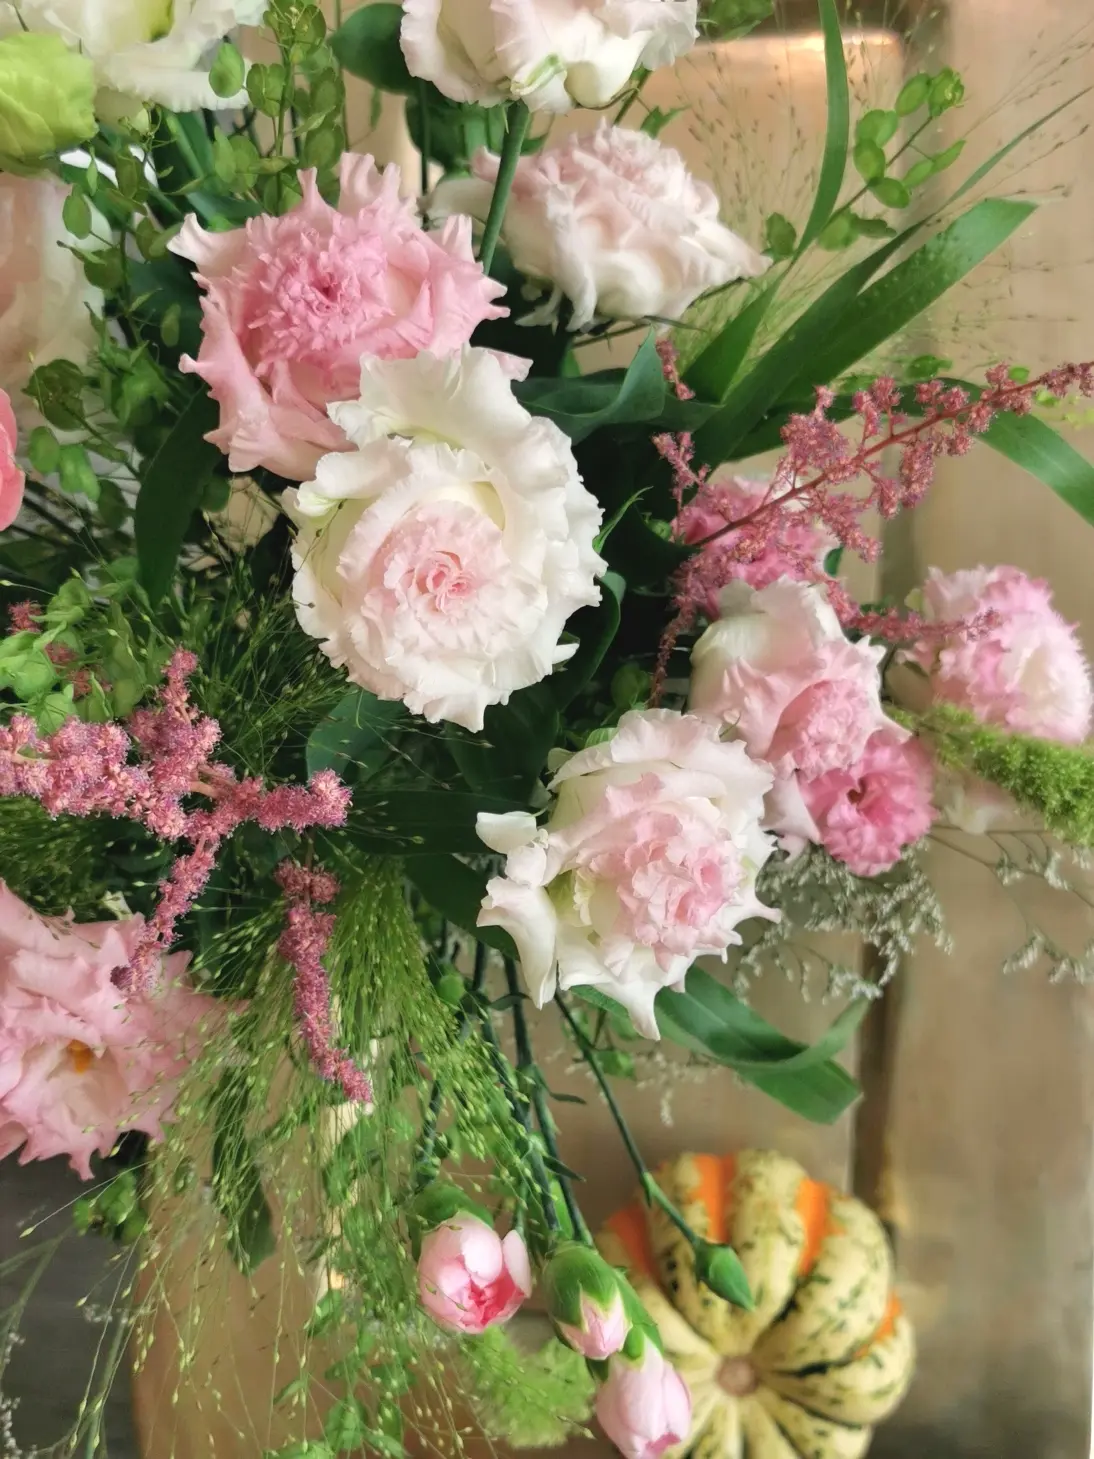 Green and pink, a delicate suggestion for a lovely bouquet.